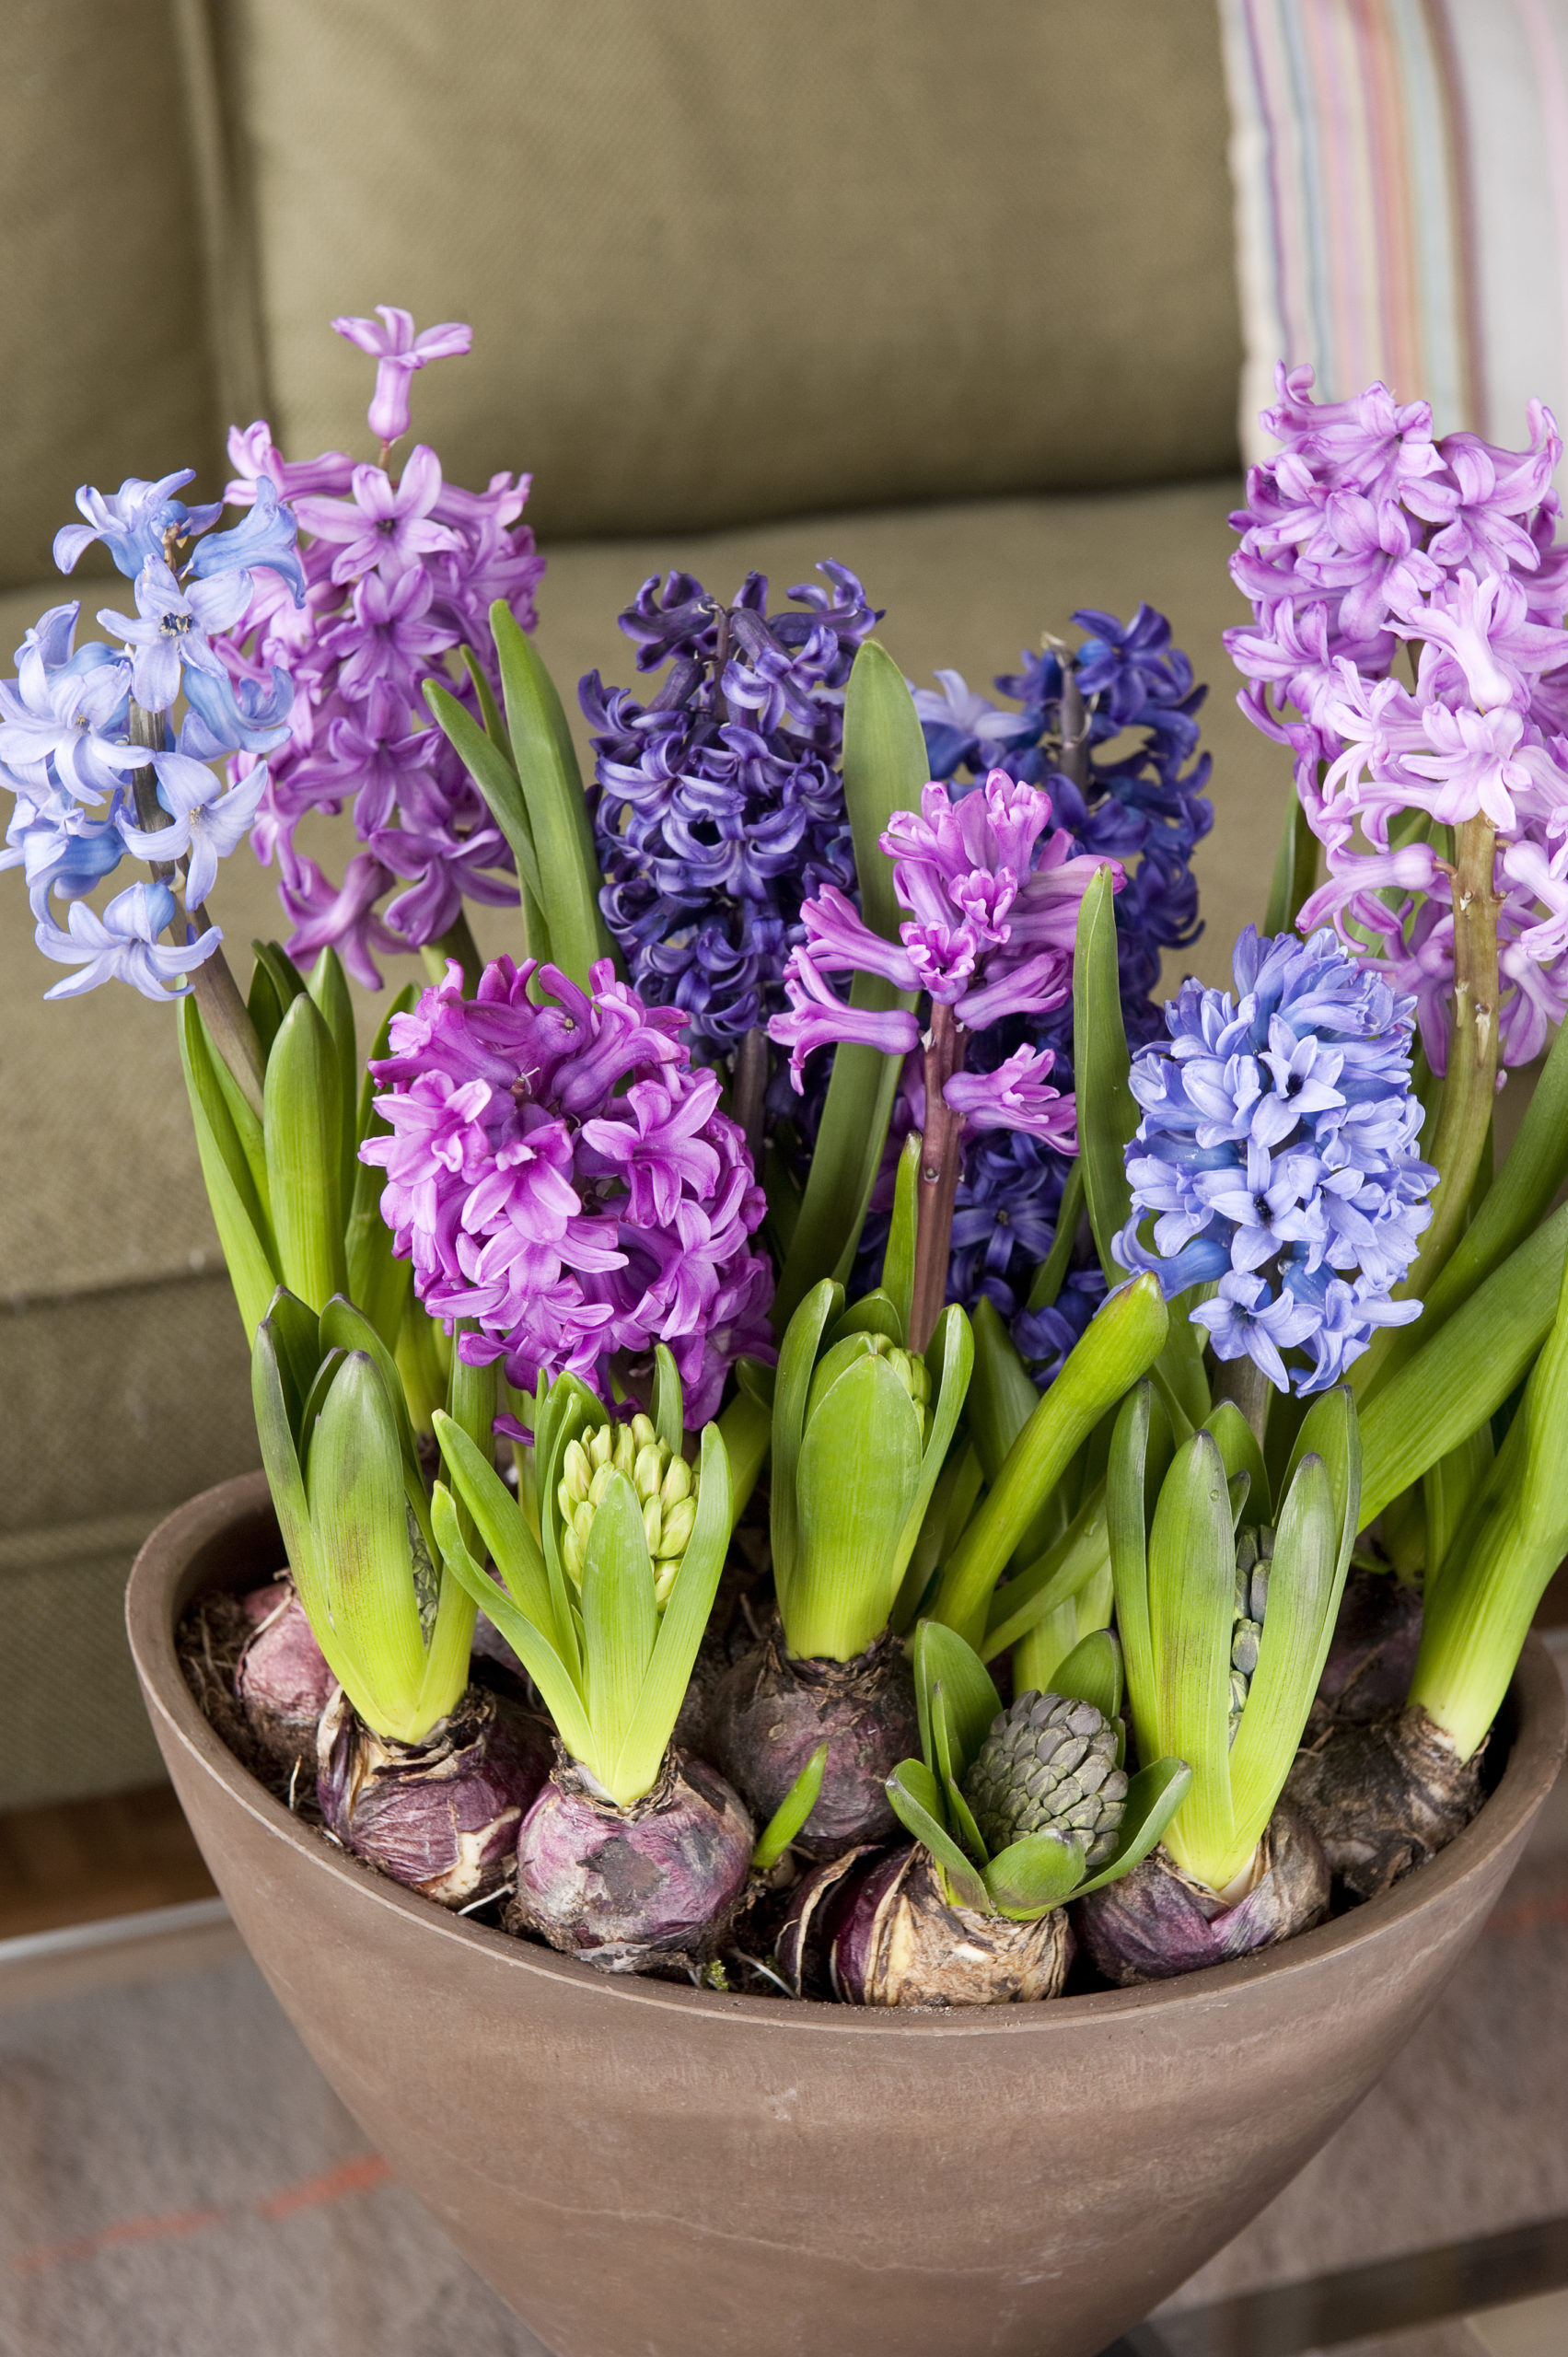 Forcing Hyacinths | How to Force Hyacinths in Vases | Hyacinths Indoors